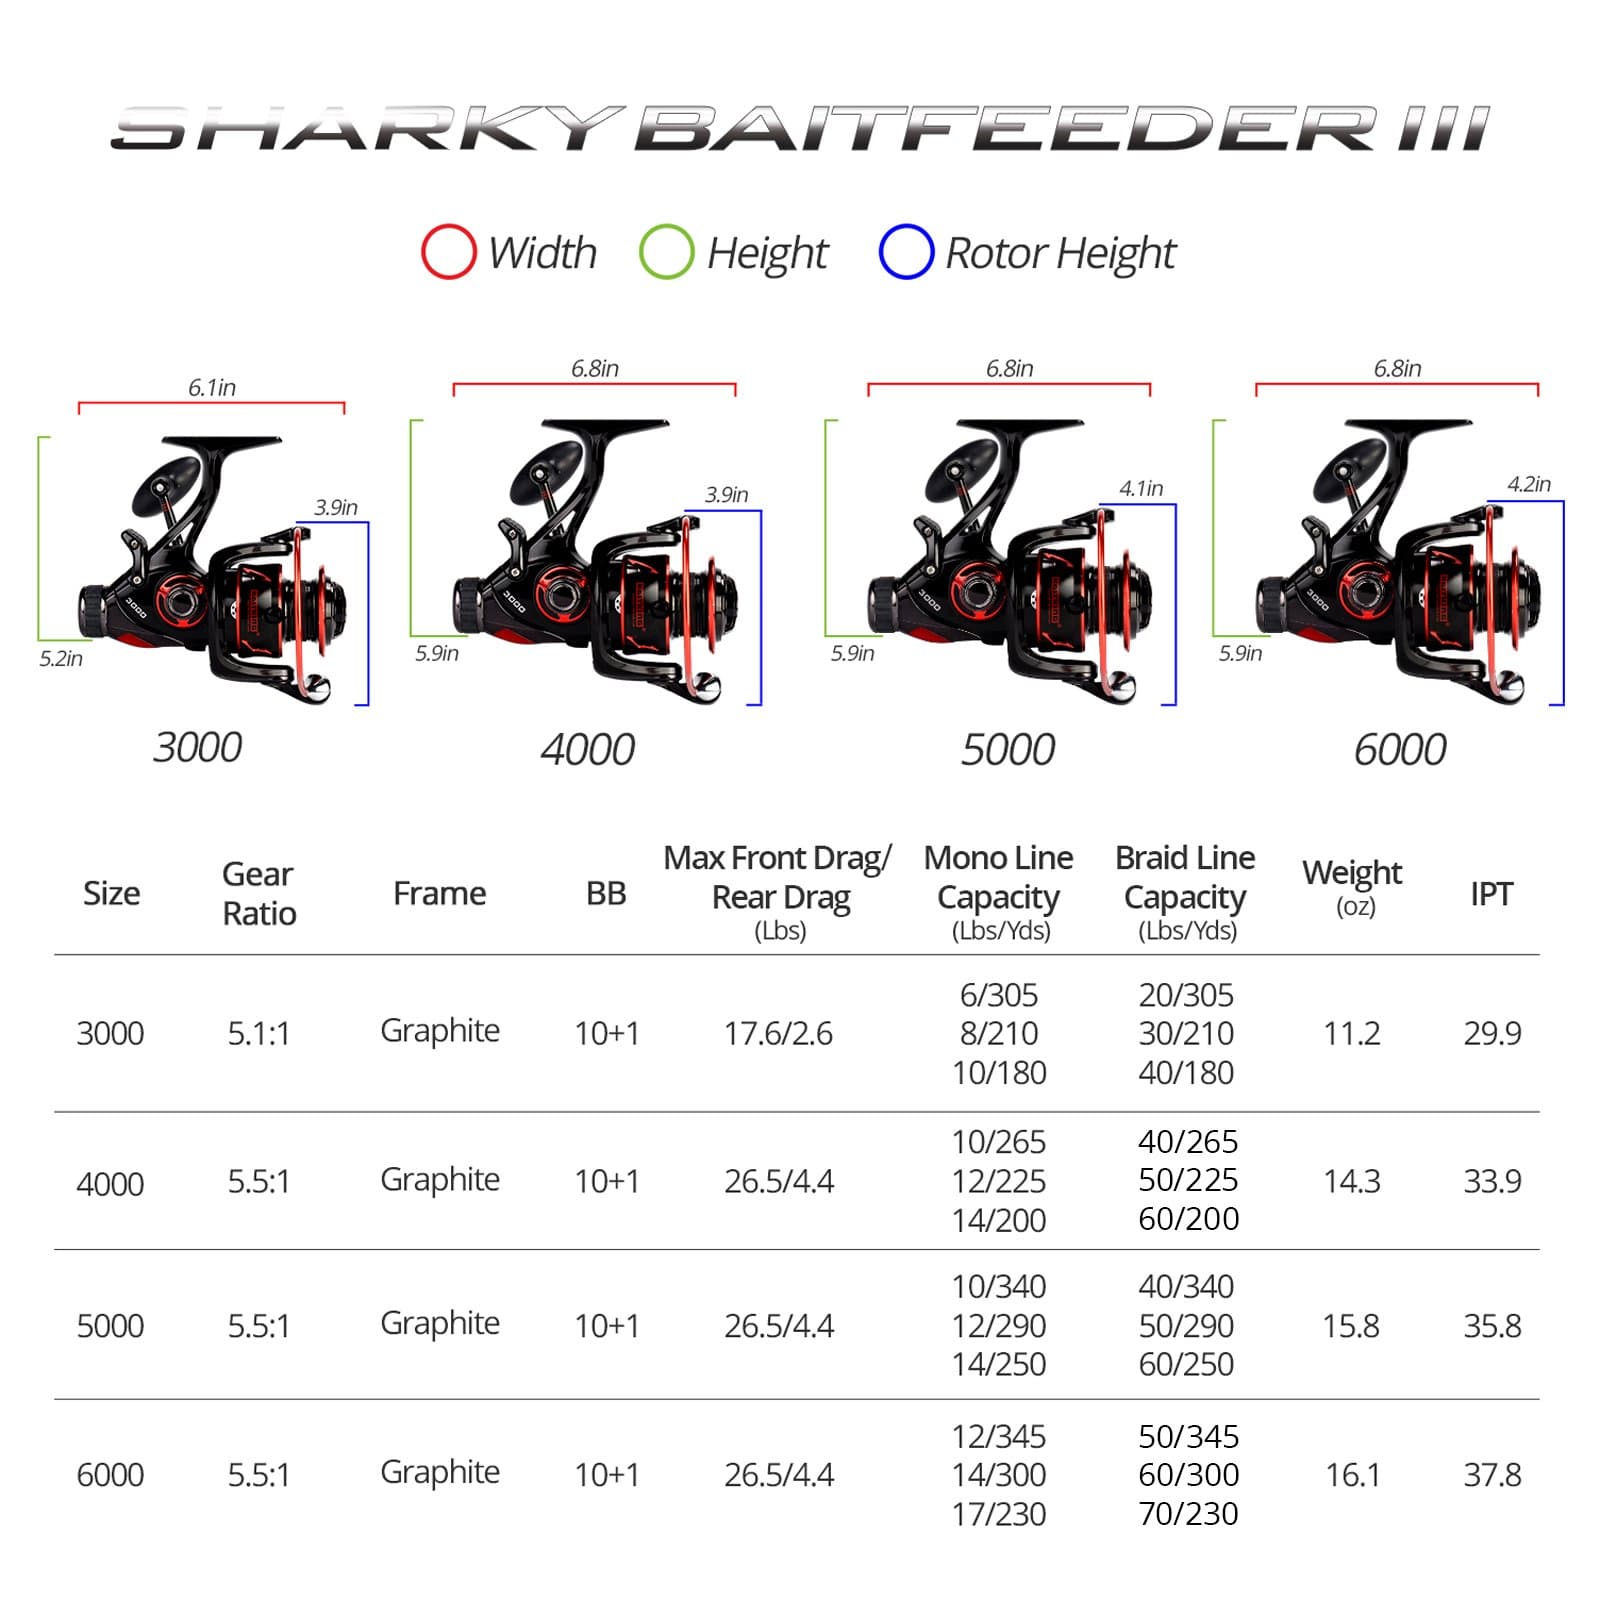 sharky 3 5000 Today's Deals - OFF 63%